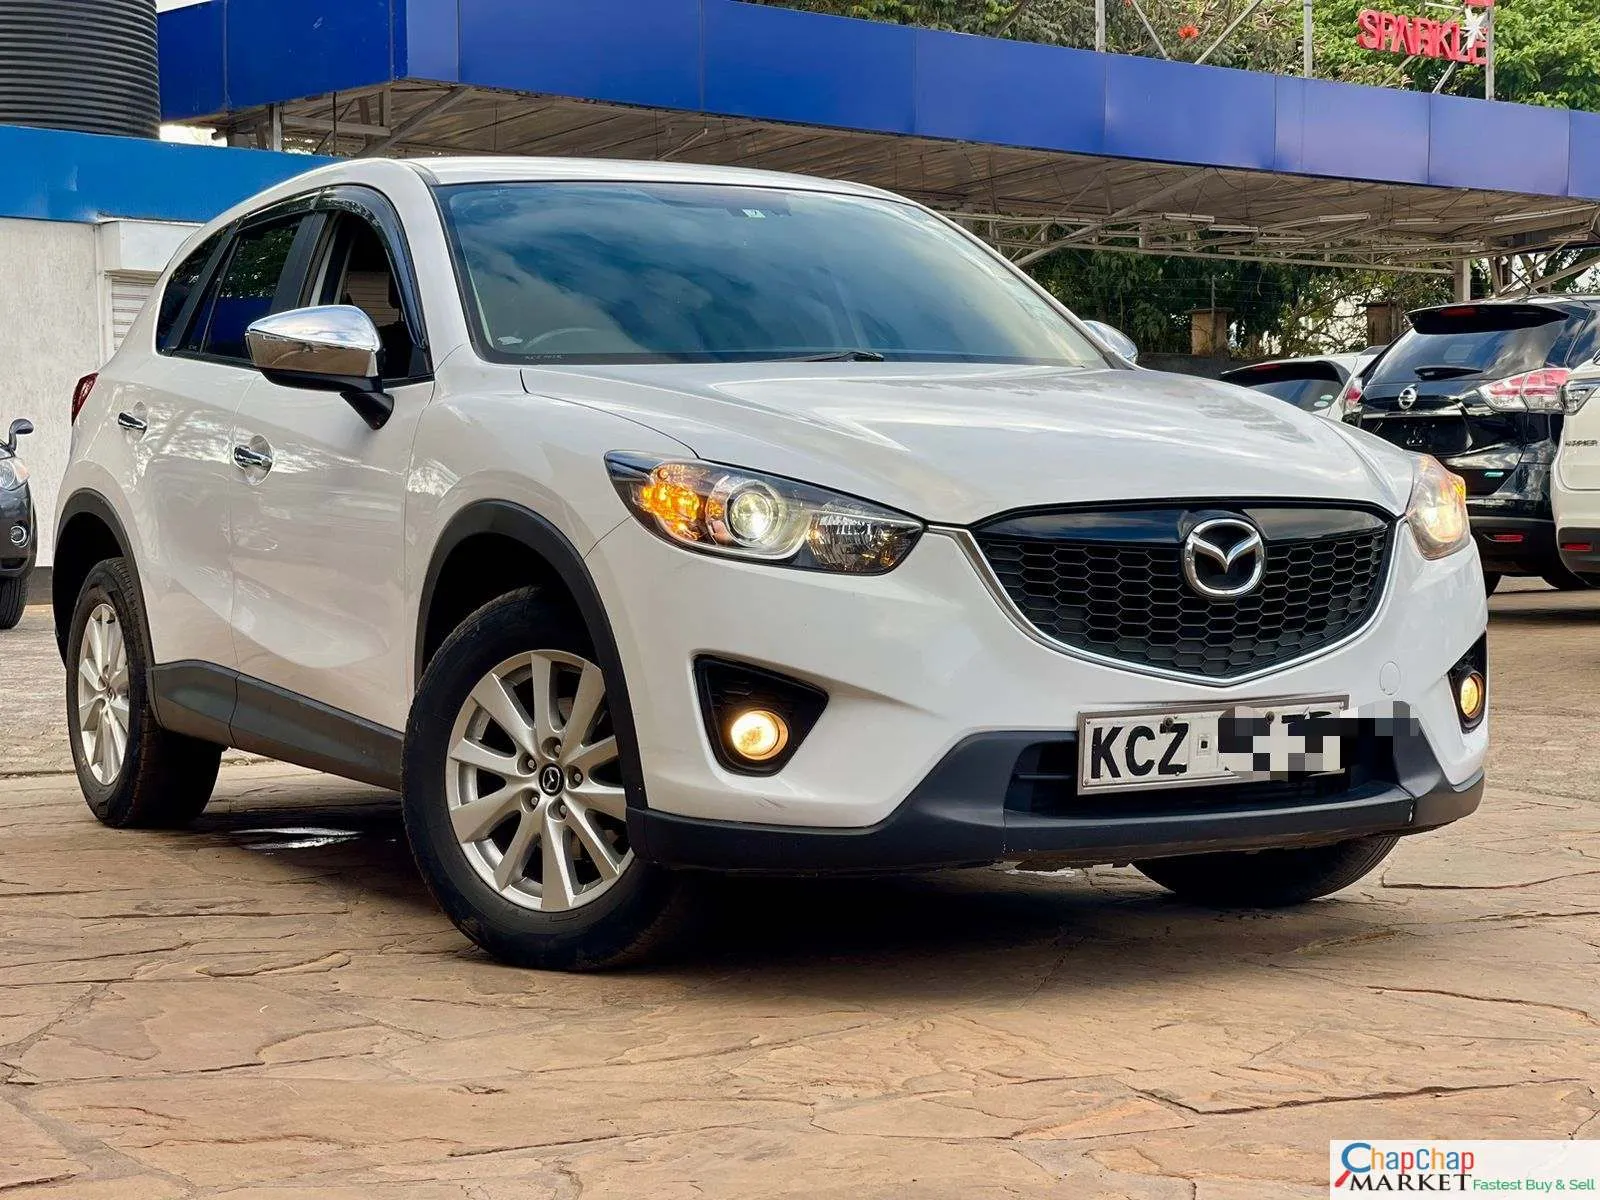 Mazda CX5 for sale in kenya hire purchase installments 2014 DIESEL You Pay 30% DEPOSIT TRADE IN OK EXCLUSIVE